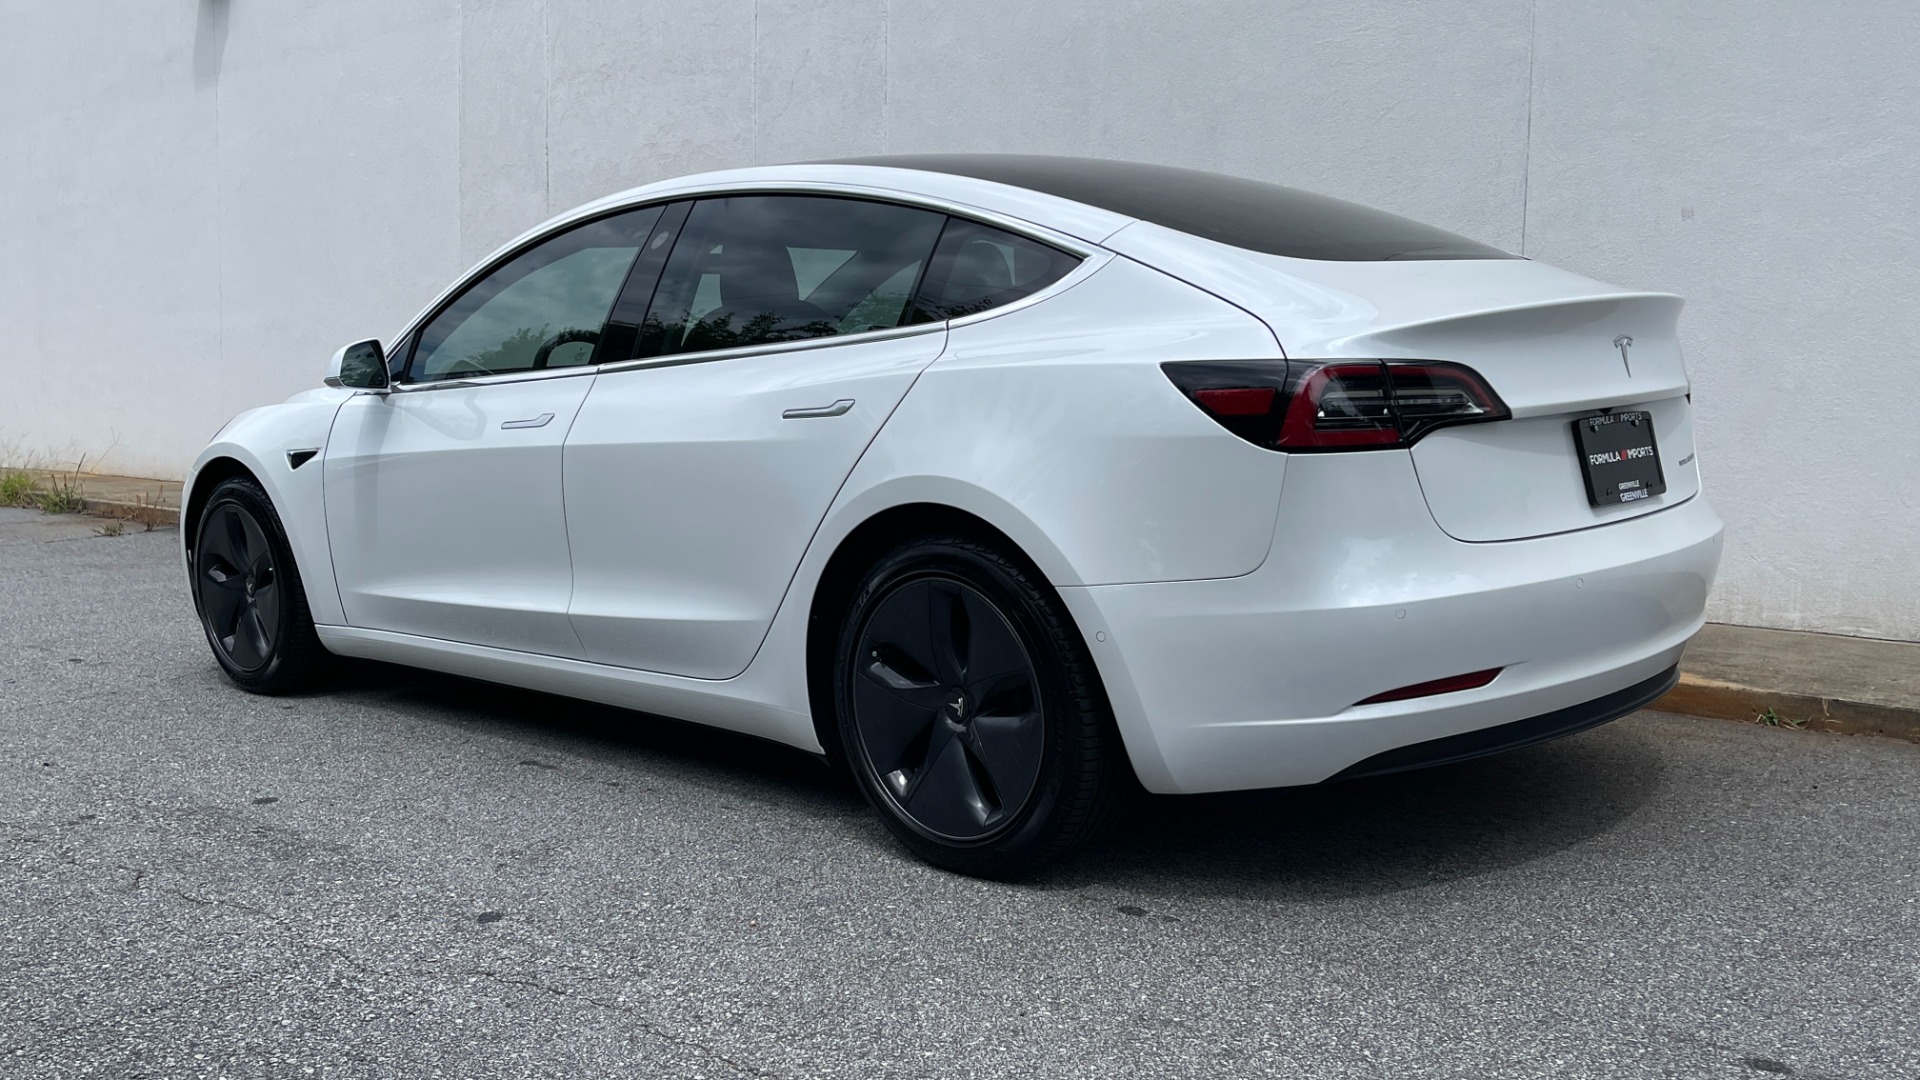 Used 2020 Tesla Model 3 Long Range / AUTOPILOT / ACCELERATION BOOST / STANDARD CONNECTIVITY for sale $56,995 at Formula Imports in Charlotte NC 28227 5